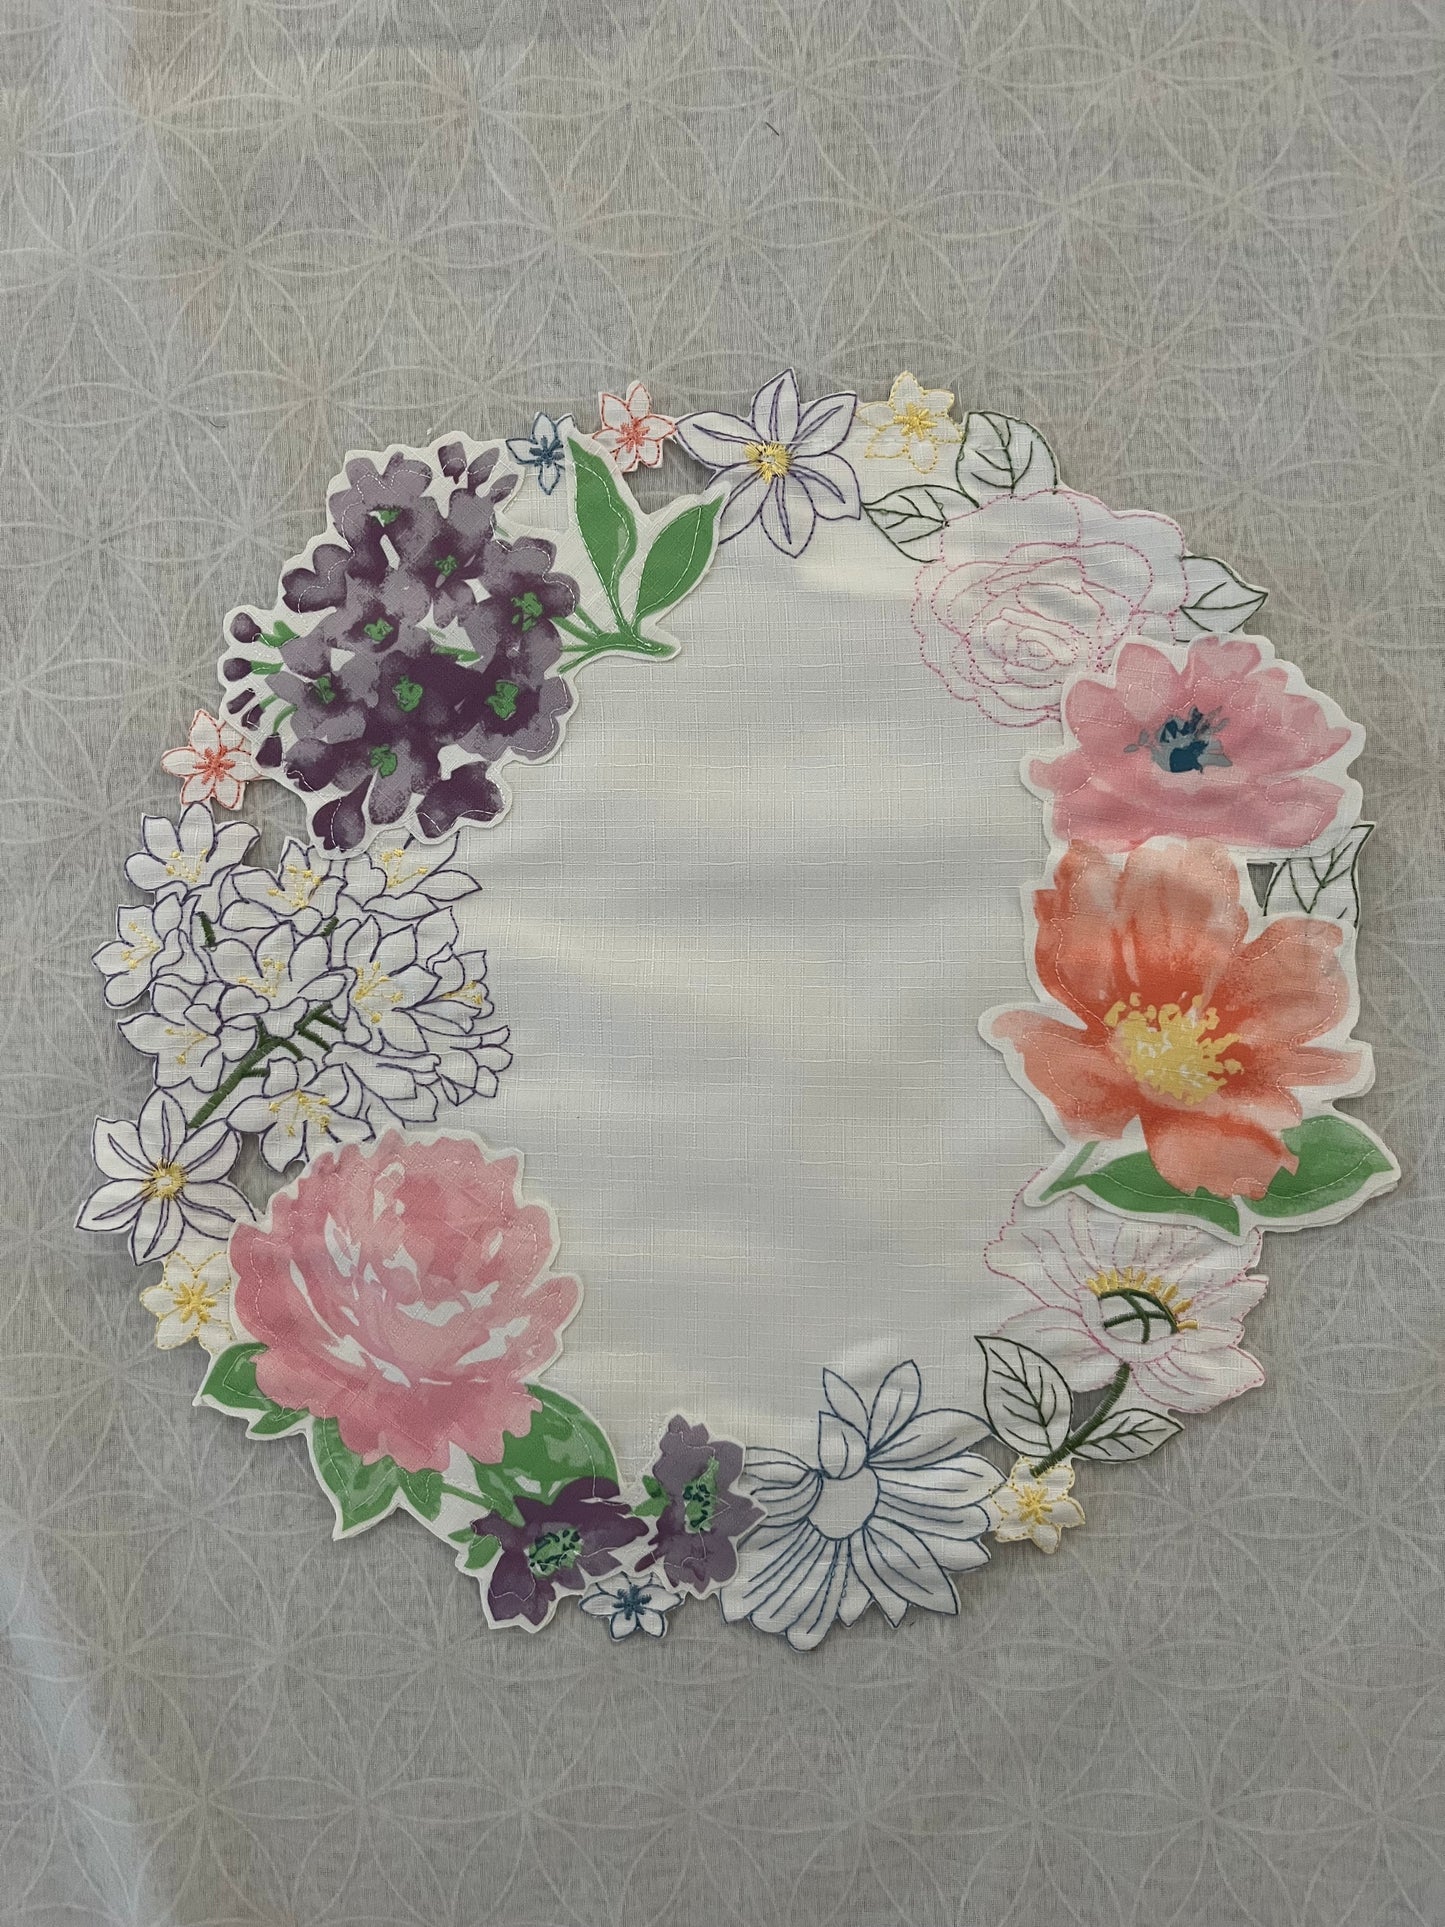 Vintage Floral Cutwork Round Placemat Doily - White & Pink